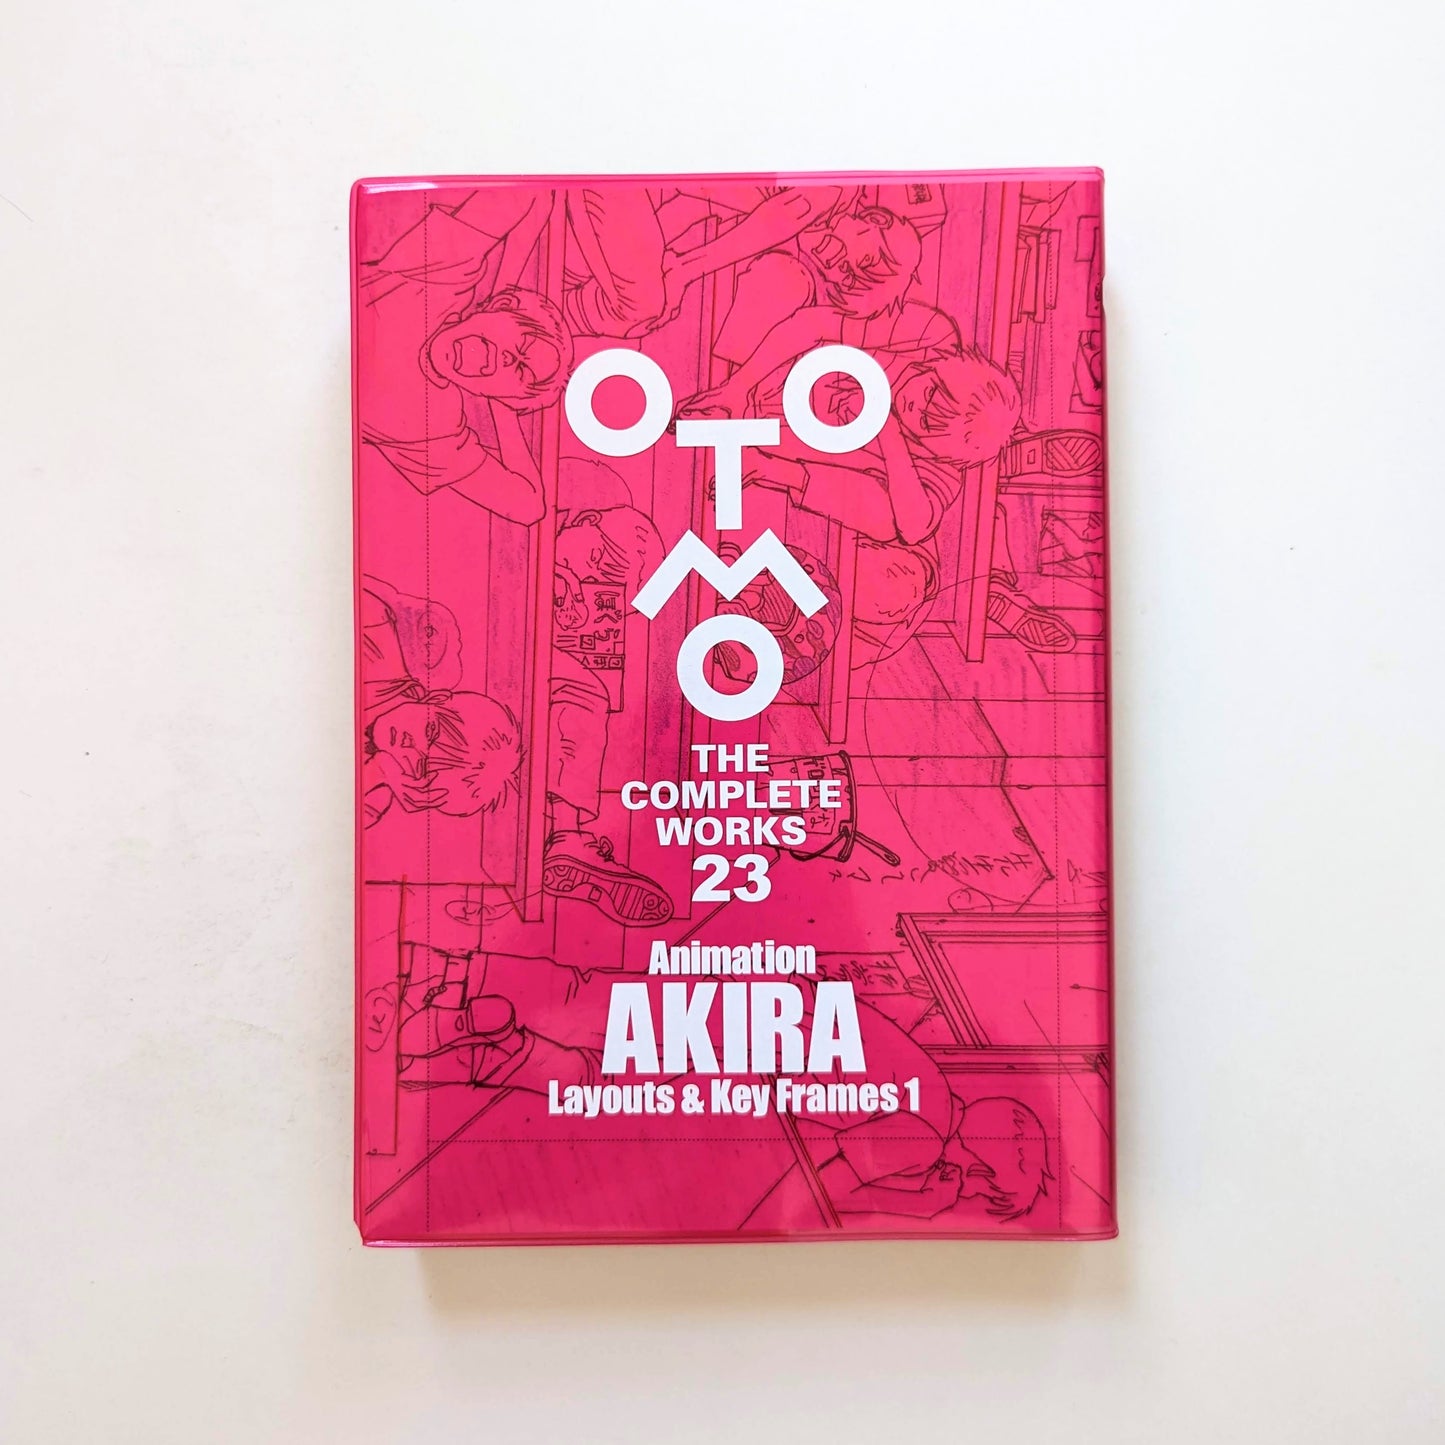 Otomo: The Complete Works No. 23: AKIRA Layouts and Key Frames 1